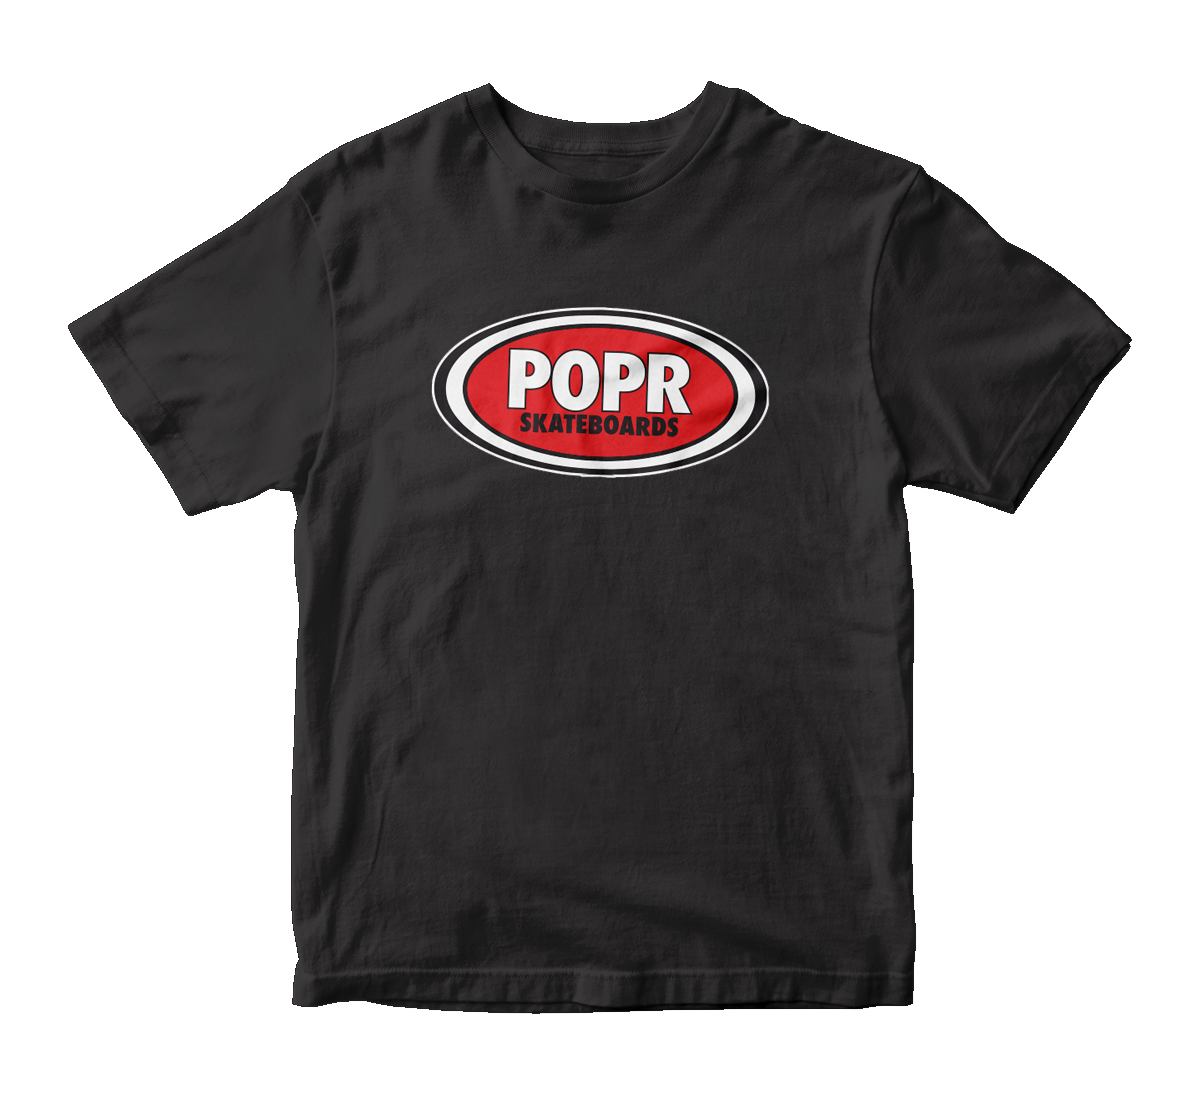 POPR Records - "Real Skateboards" (Black) (Youth T-Shirt)